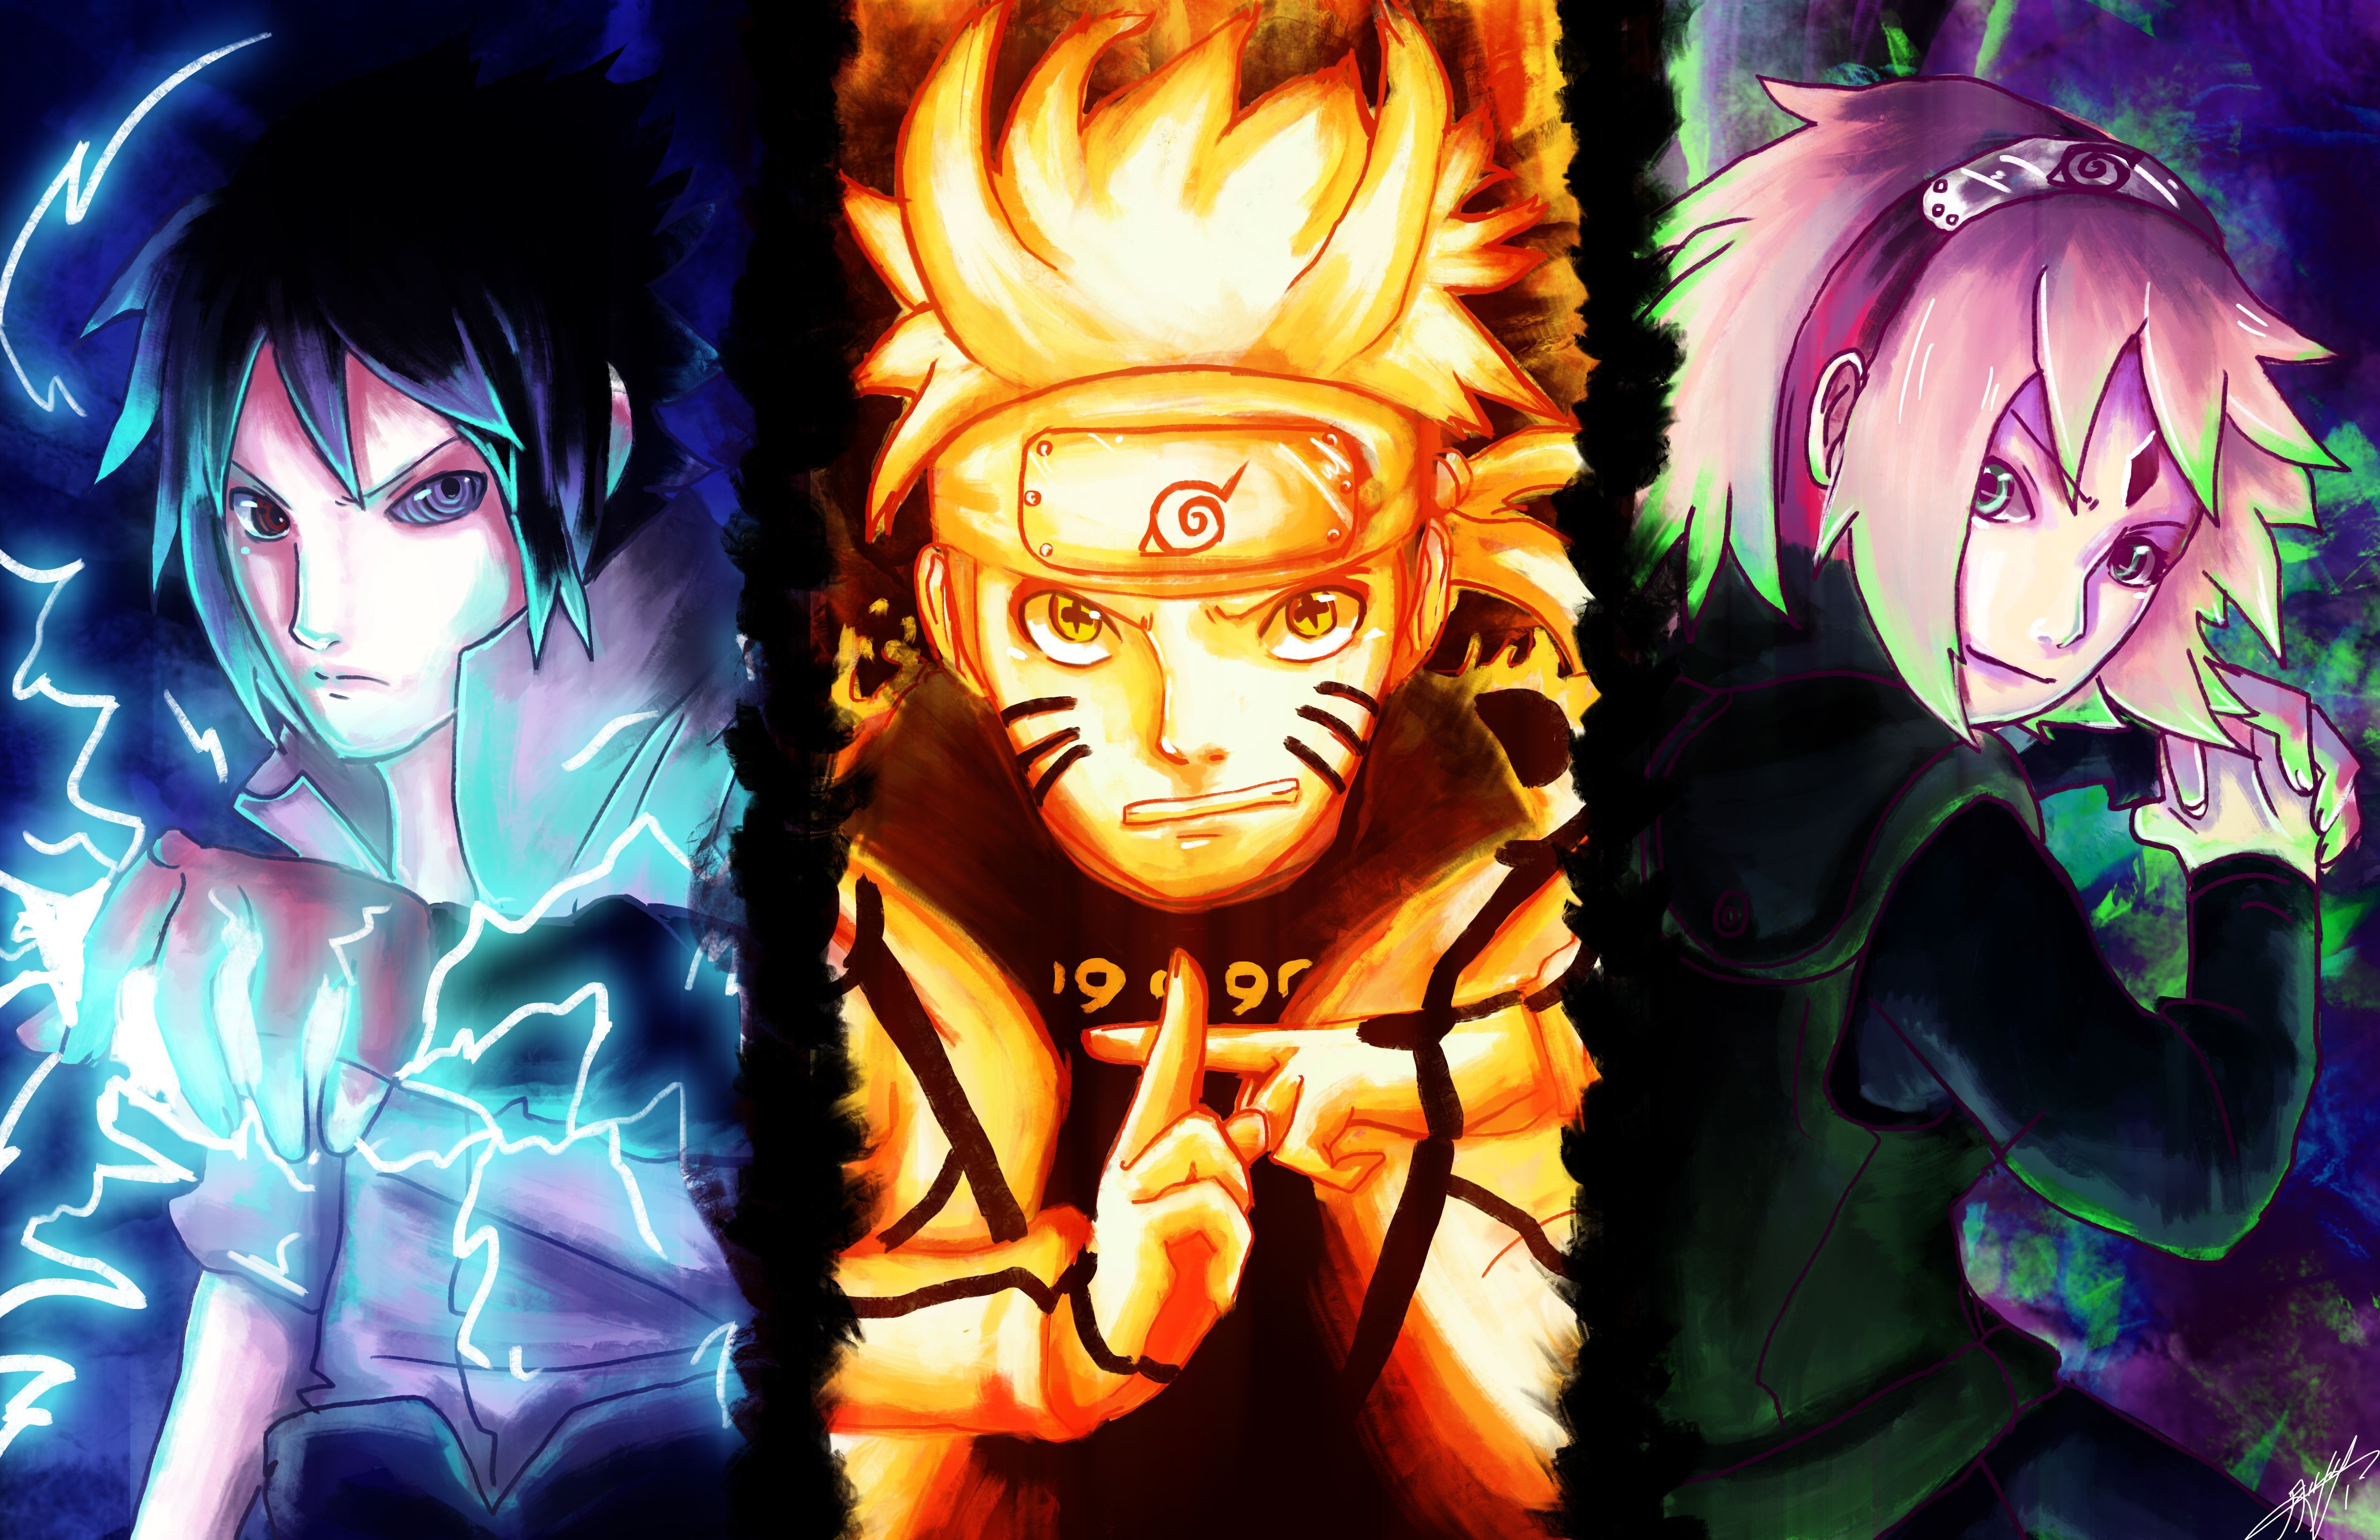 Naruto Wallpaper Collection For Free Download. Cool anime wallpaper, Anime wallpaper, Naruto wallpaper